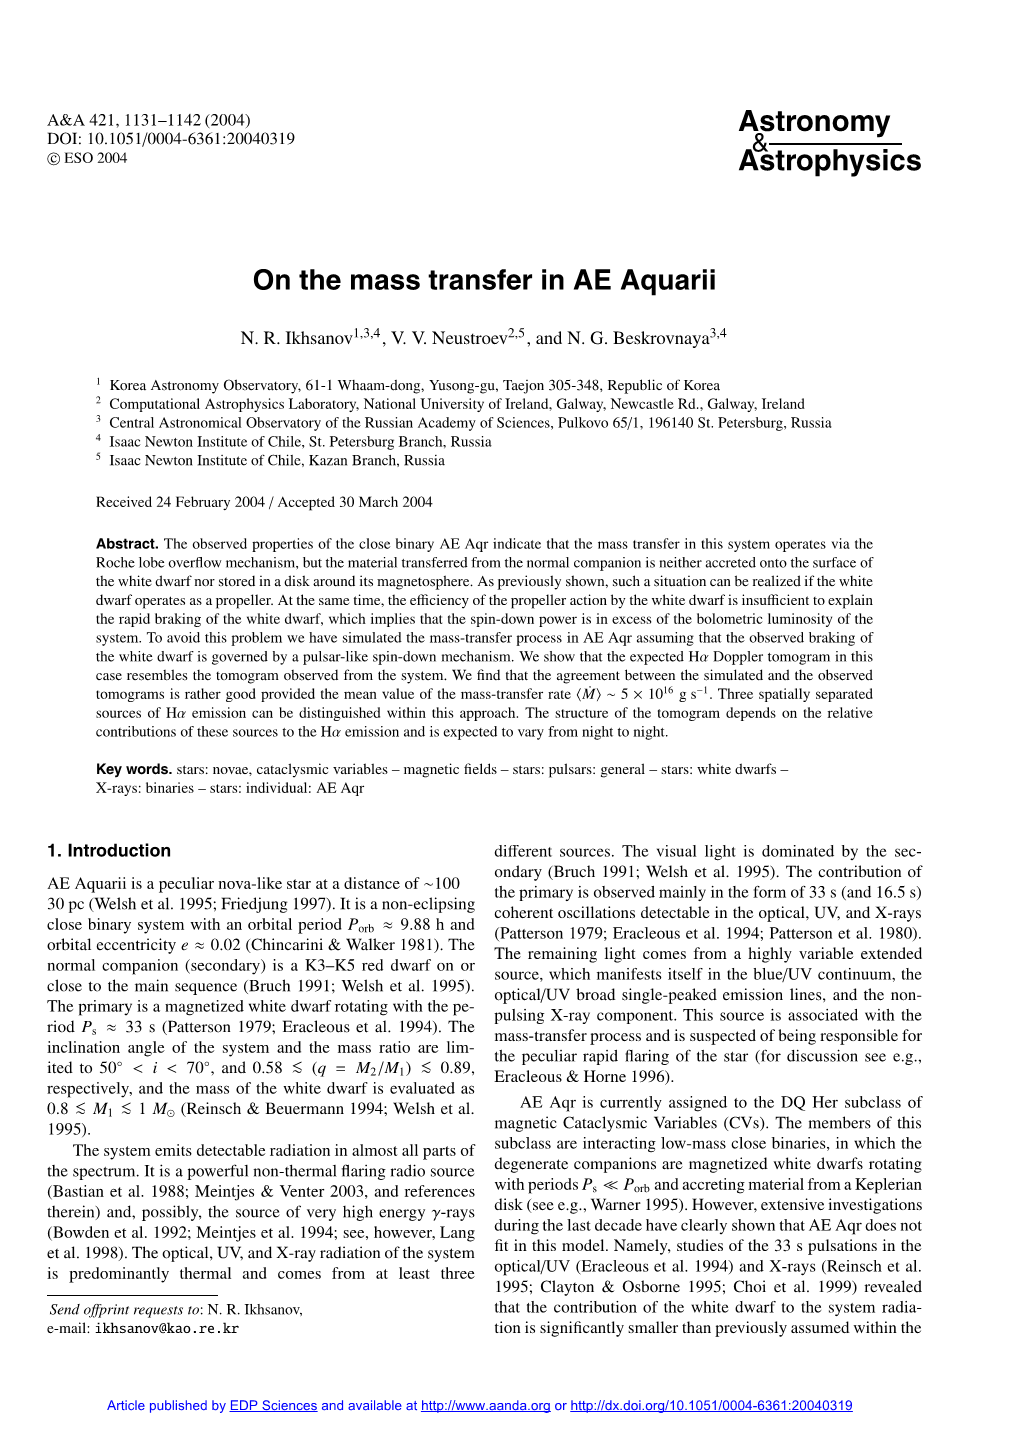 On the Mass Transfer in AE Aquarii